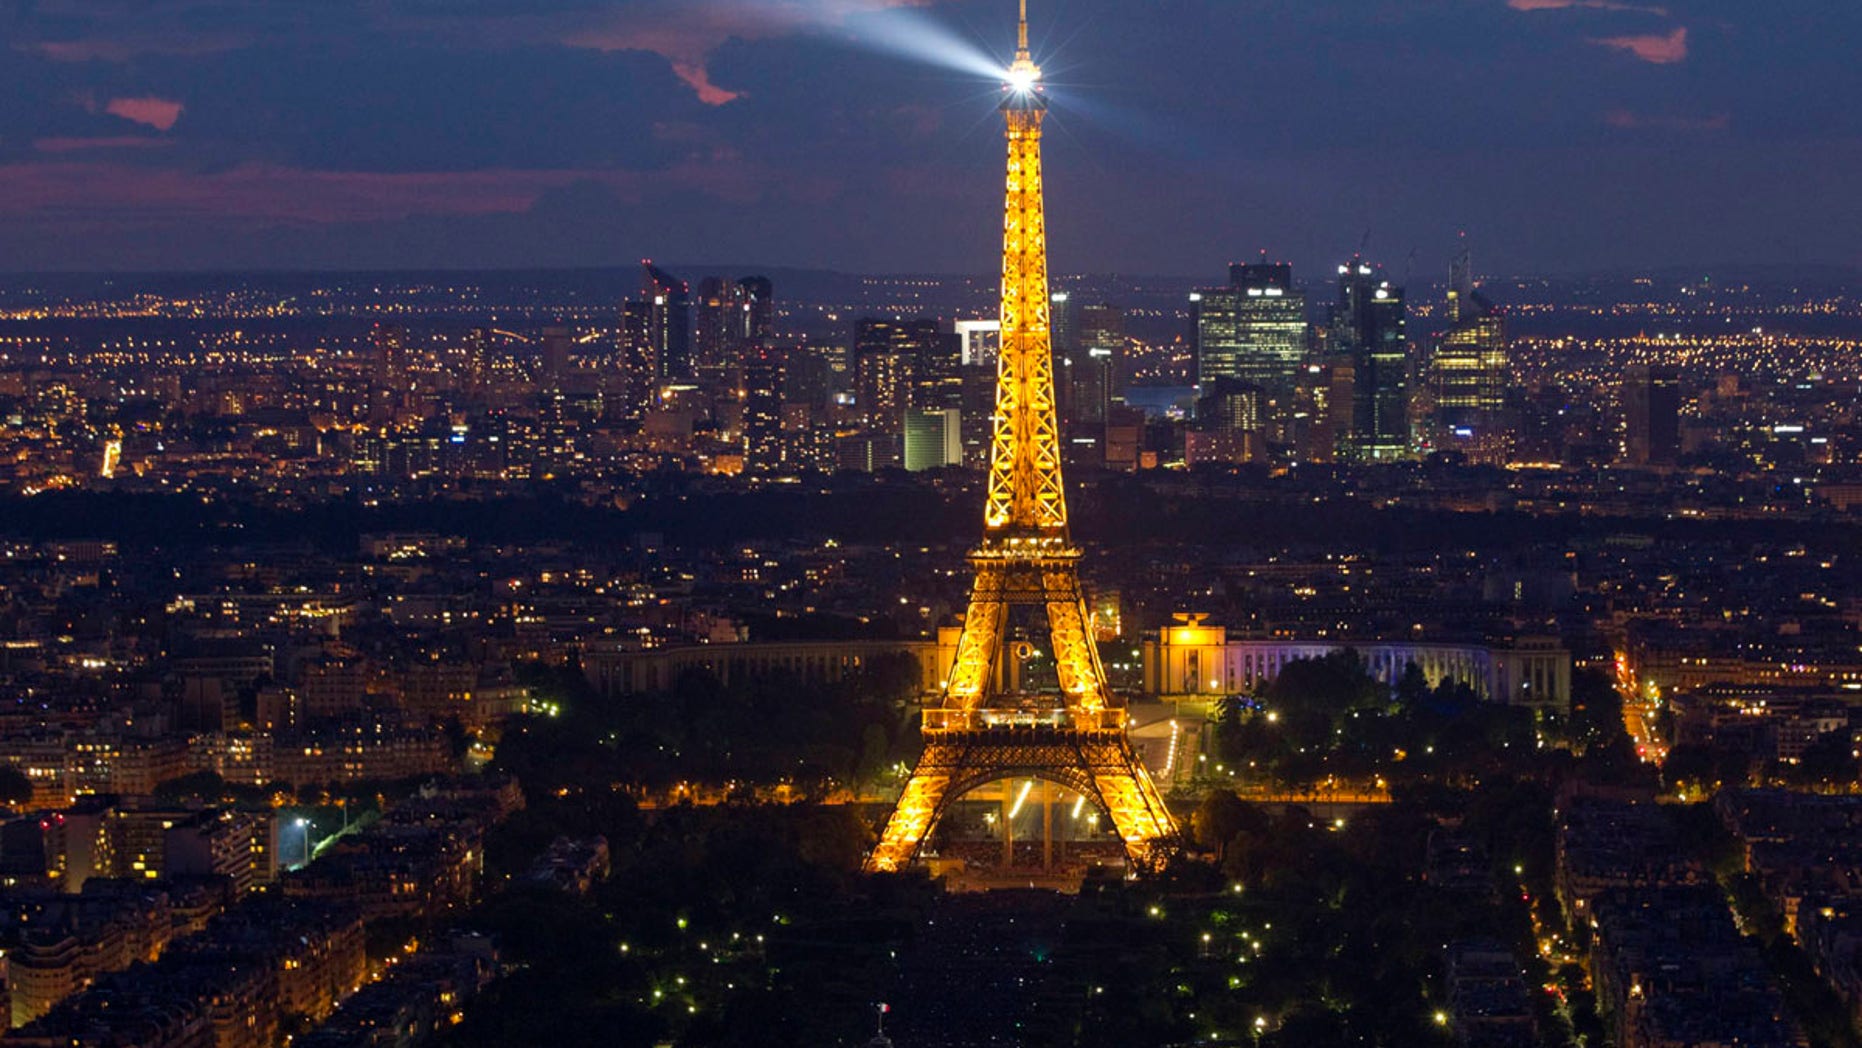 Taking photos of Eiffel Tower at night is illegal | Fox News